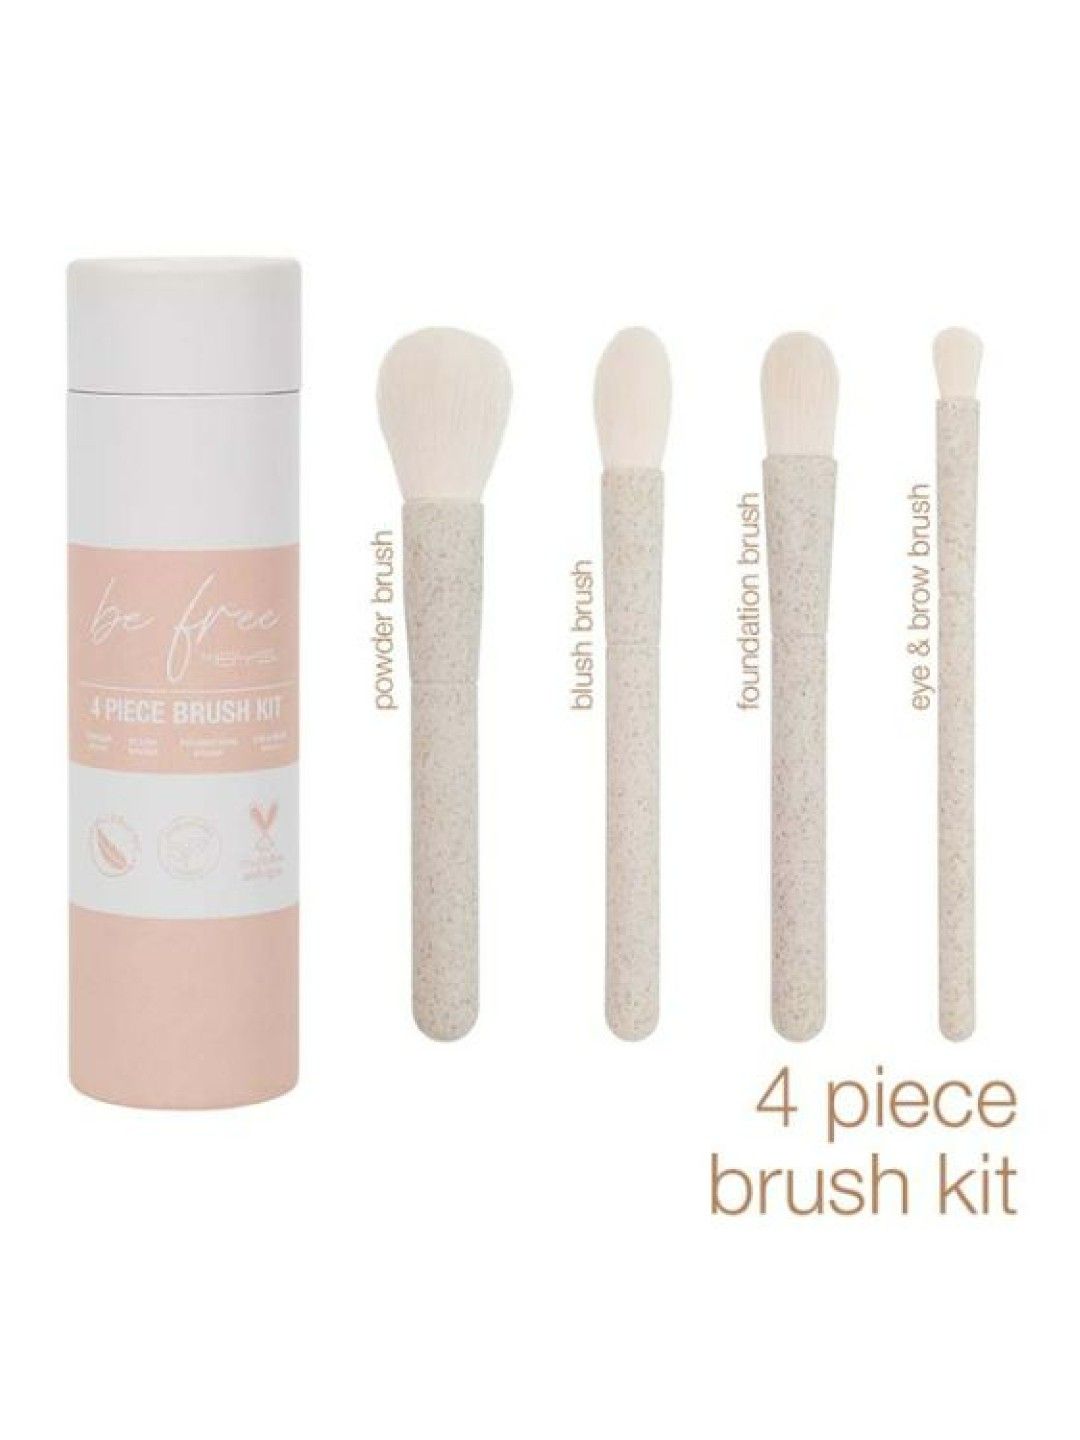 BYS Be Free 4 Piece Brush Kit (No Color- Image 1)